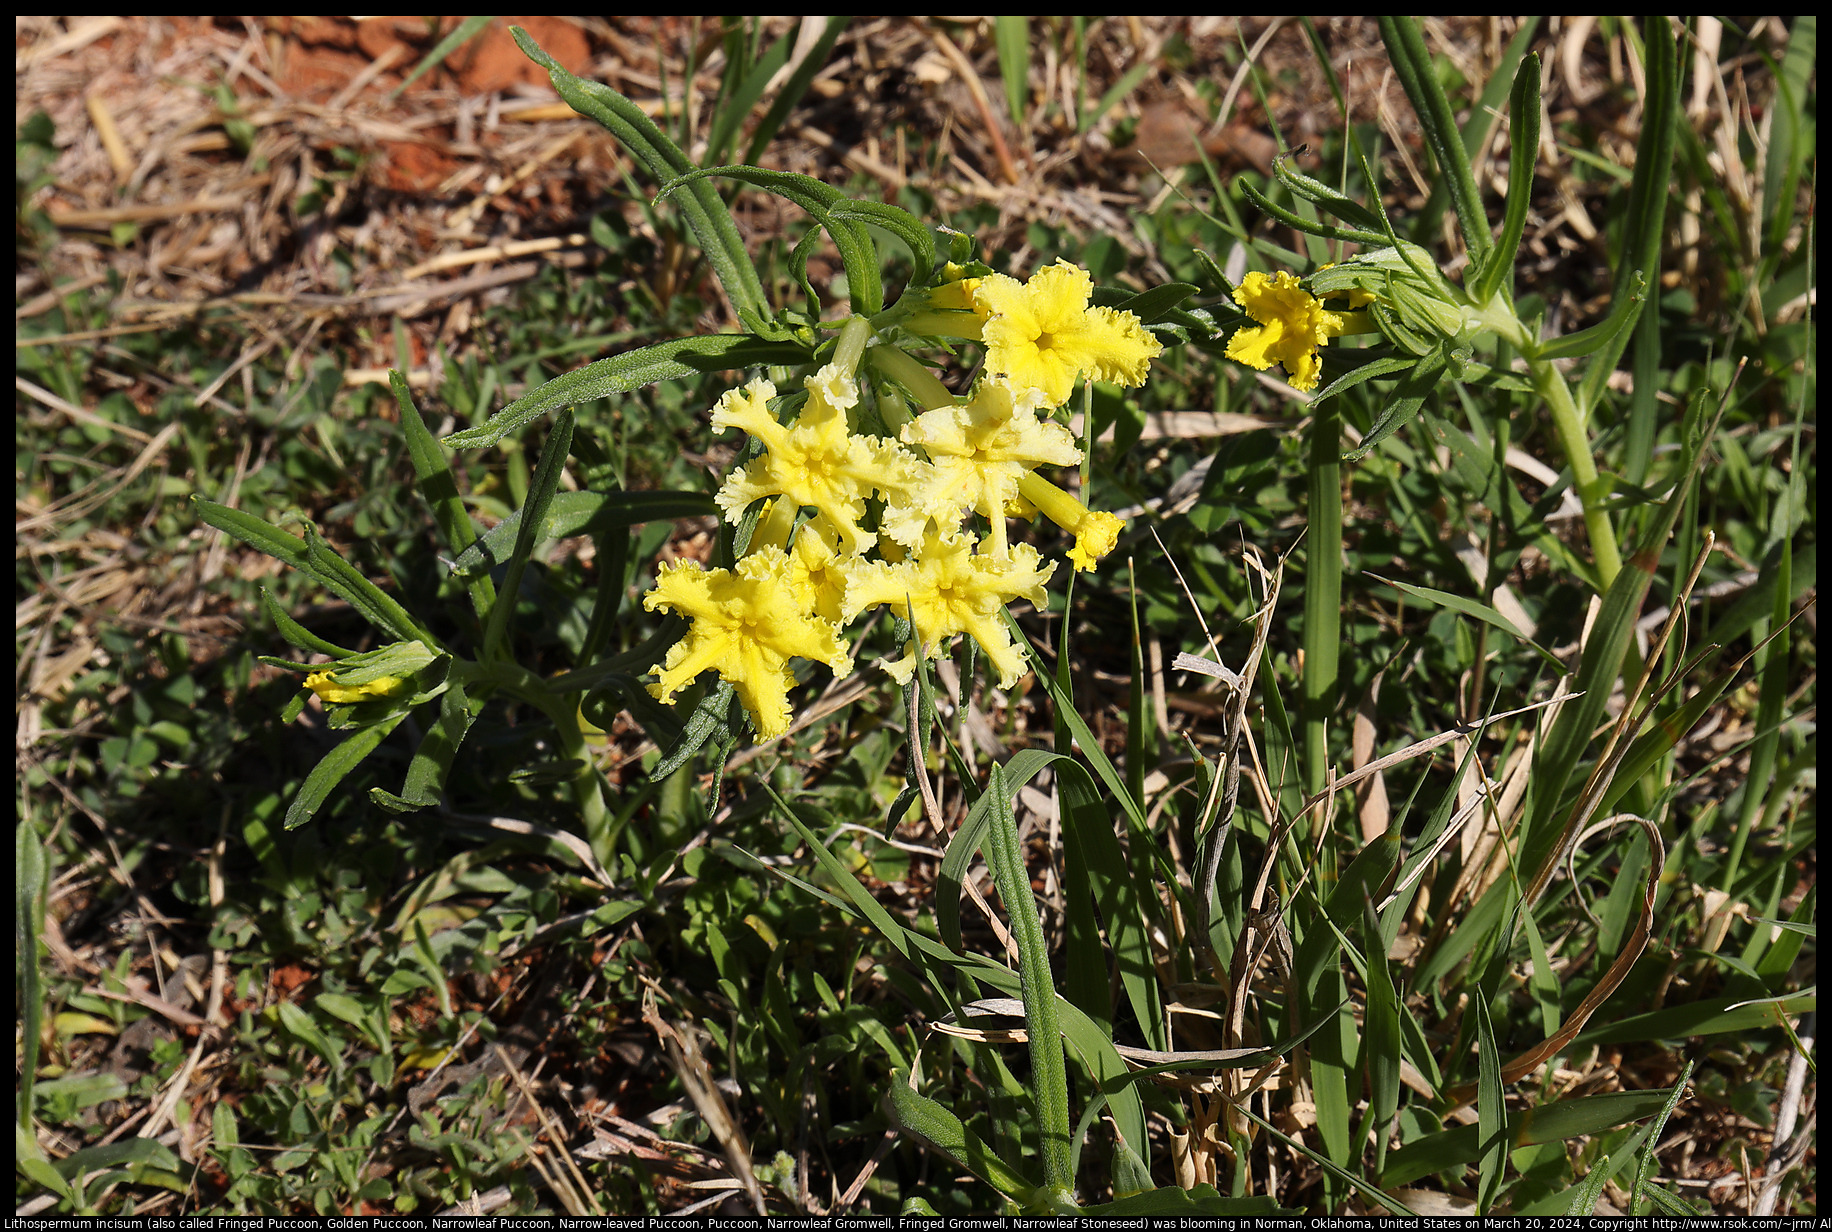 Lithospermum incisum (also called Fringed Puccoon, Golden Puccoon, Narrowleaf Puccoon, Narrow-leaved Puccoon, Puccoon, Narrowleaf Gromwell, Fringed Gromwell, Narrowleaf Stoneseed) was blooming in Norman, Oklahoma, United States on March 20, 2024